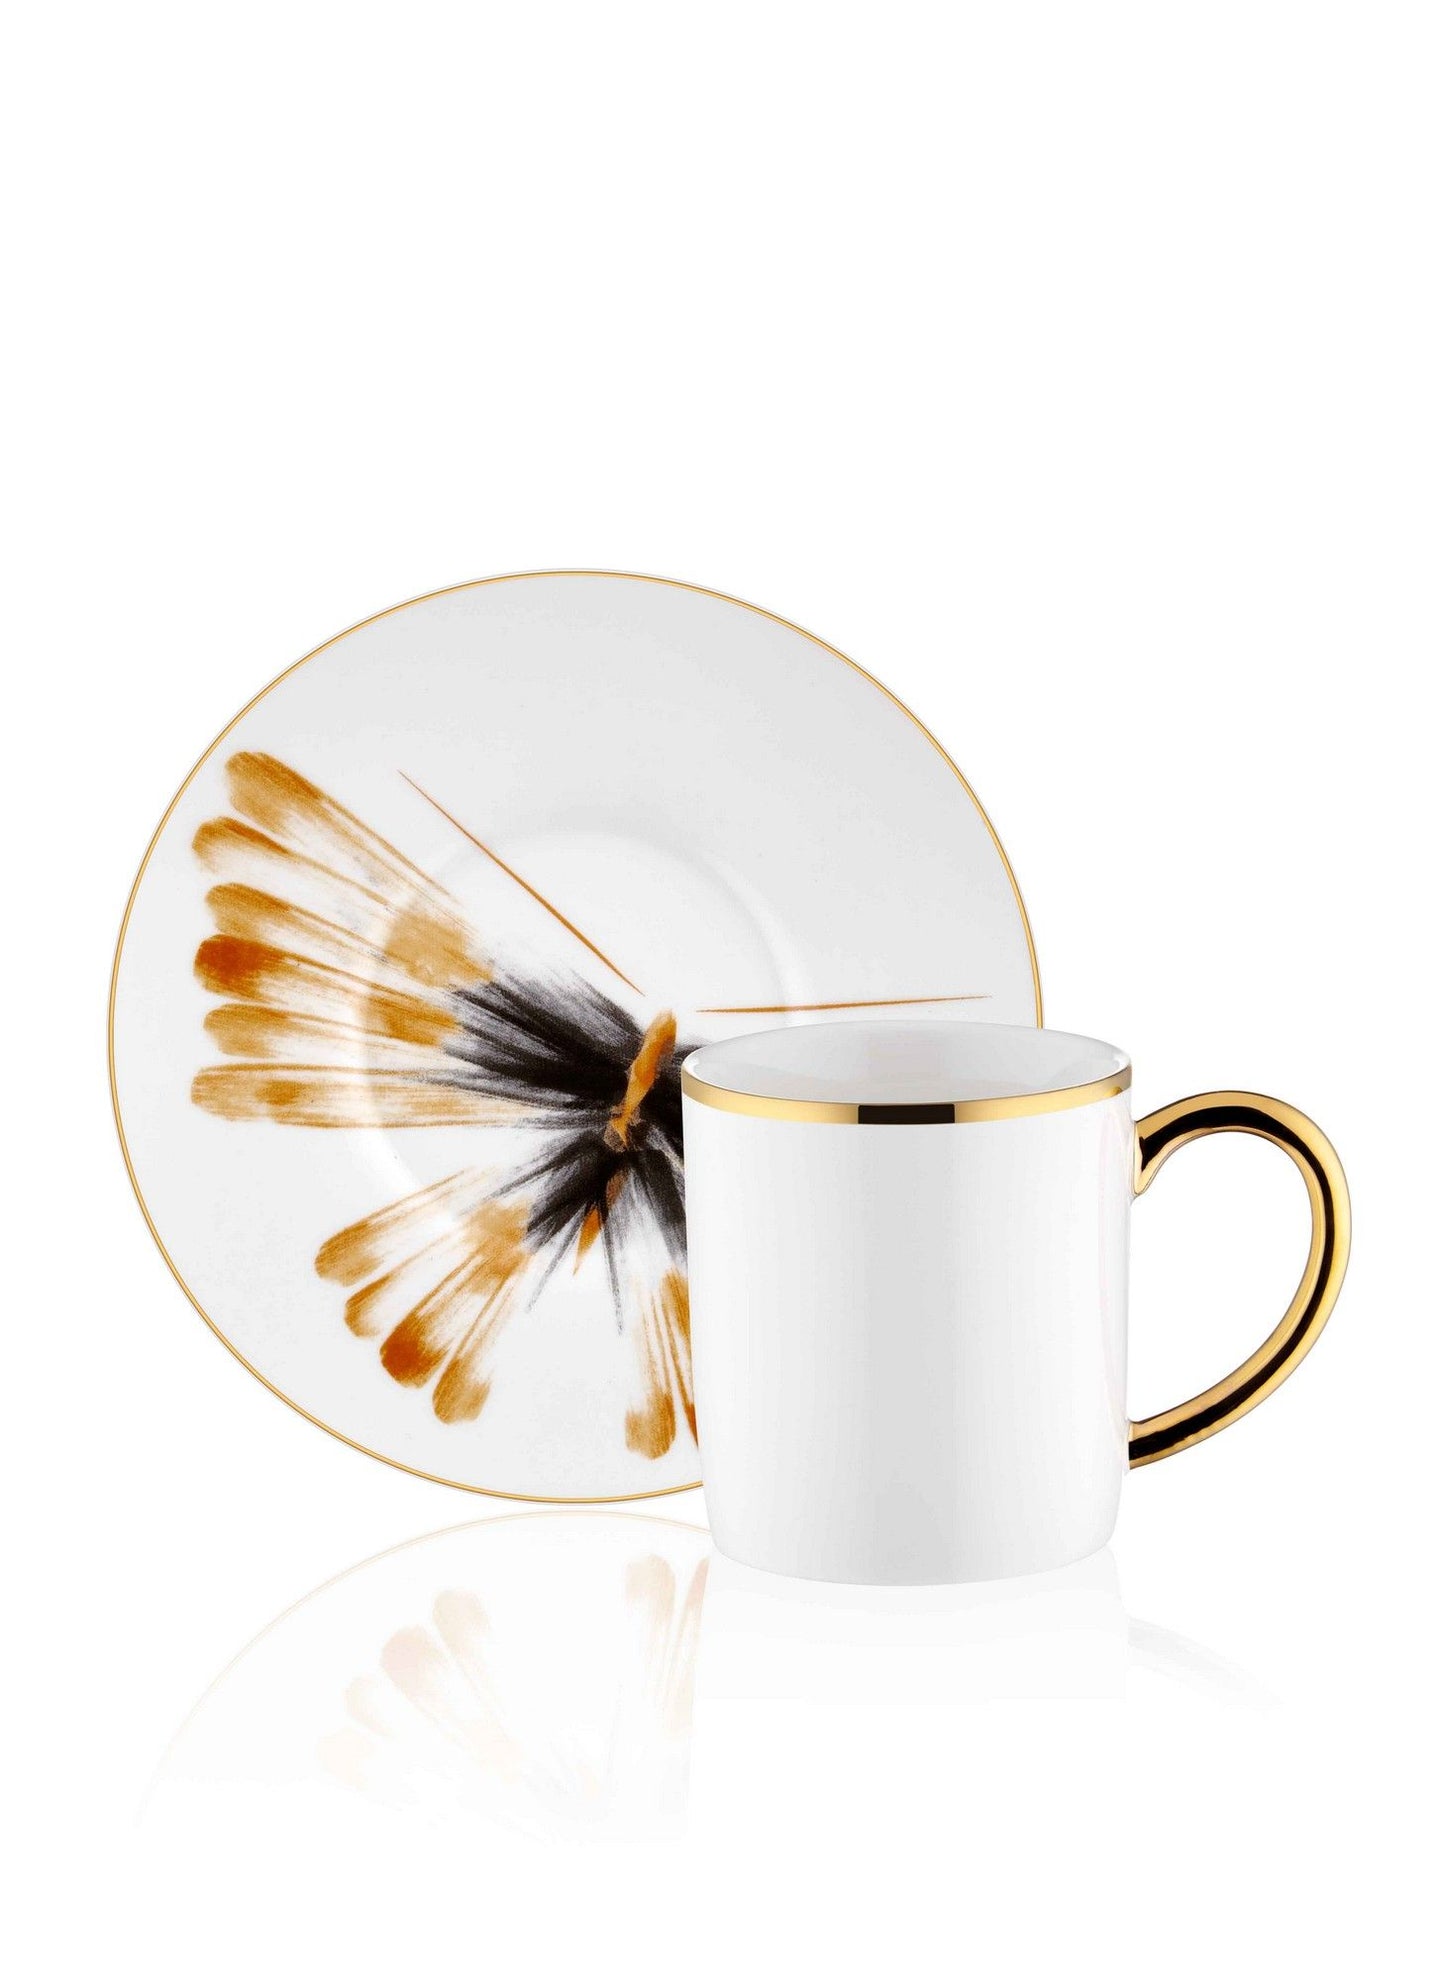 CUP0039 - Coffee Cup Set (12 Pieces)